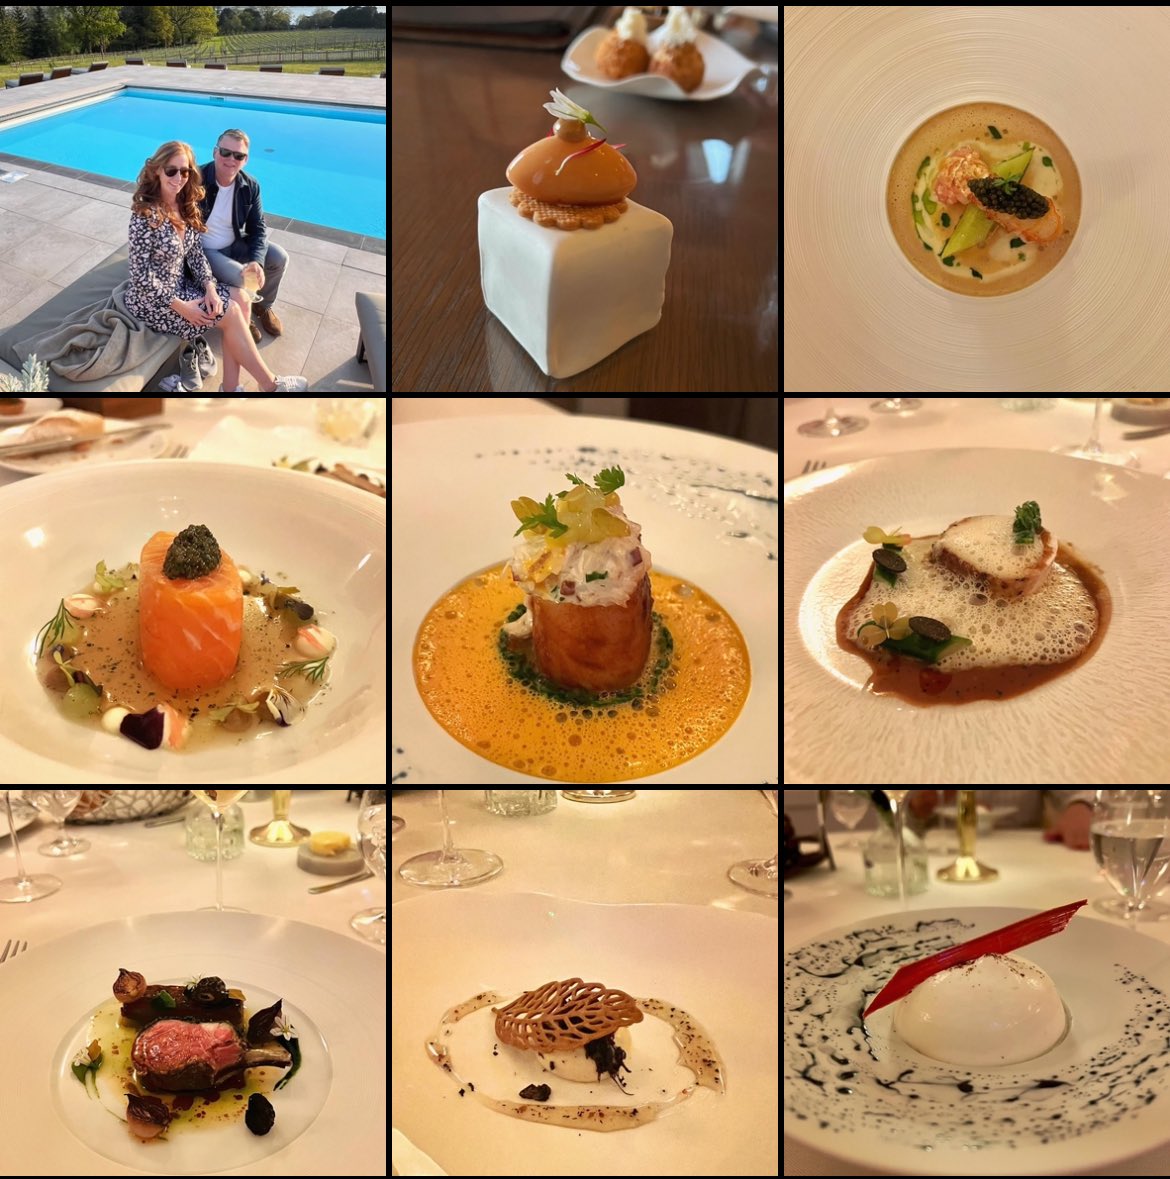 What a way to end the weekend of celebrating… a @michaelcaines tasting menu @Lympstone_Manor 🌟🌟🌟🌟🌟 I felt like, to quote the lovely late Dave Myers @HairyBikers “Cleopatra bathing in goat milk” 🥰
.
#michaelcaines #lympstonemanor #tastingmenu #onceinalifetime #celebration